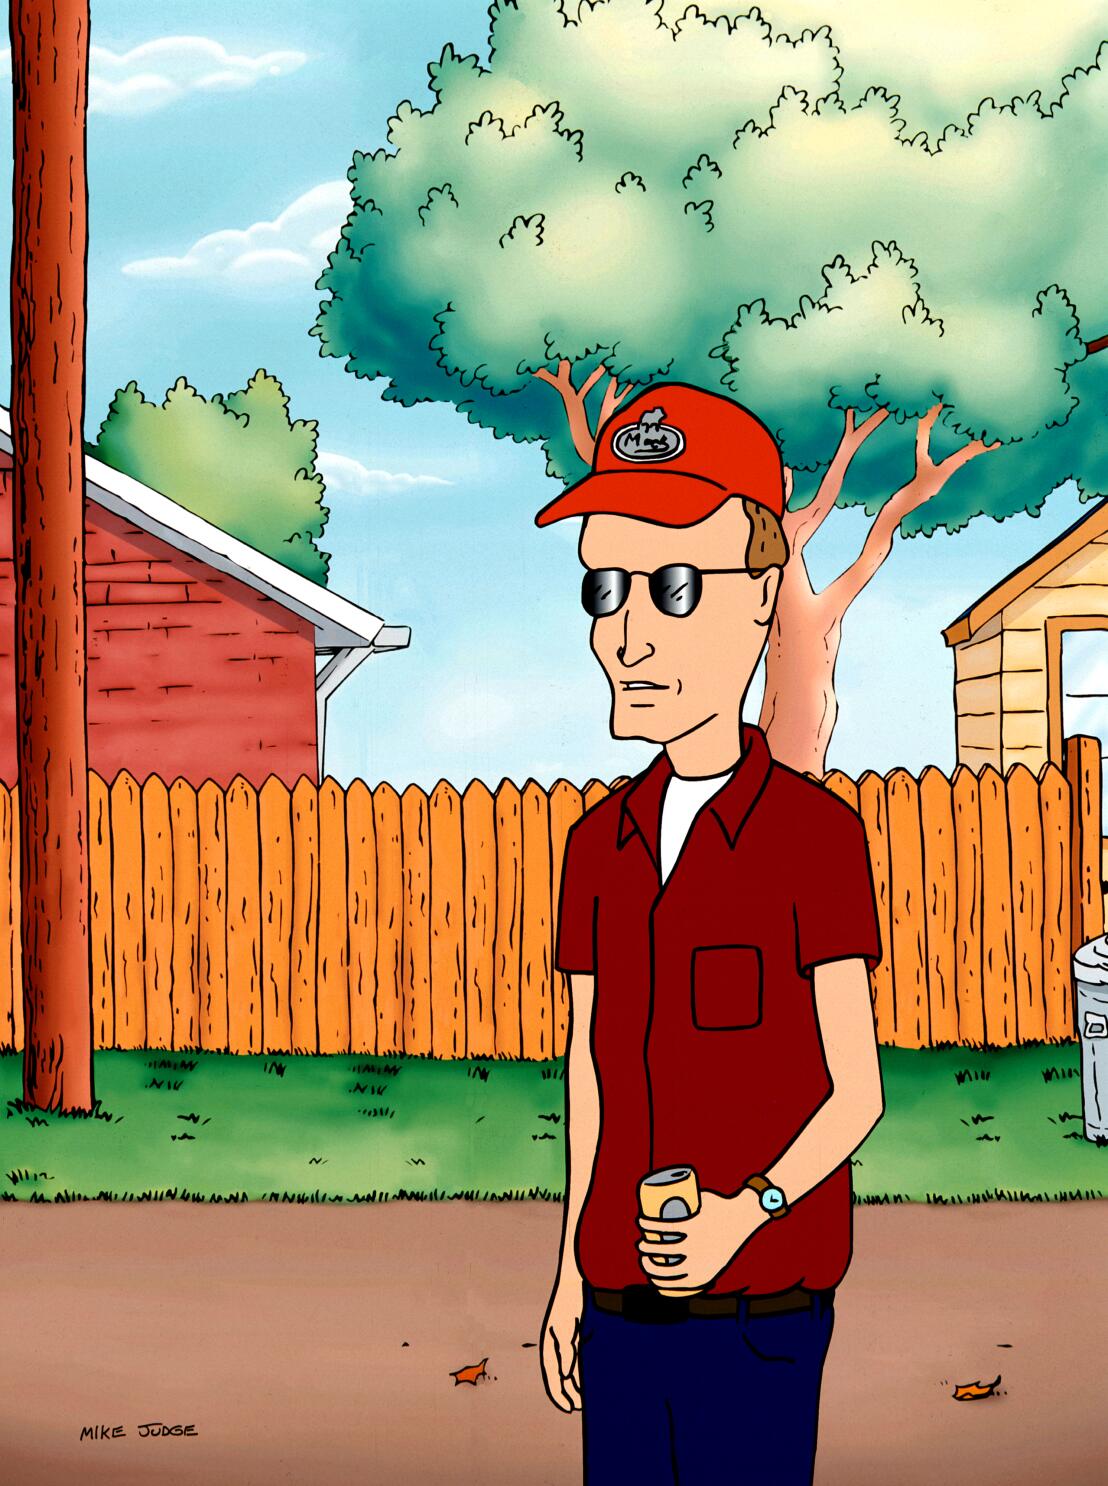 Johnny Hardwick who voiced Dale Gribble in King of the Hill found dead in  Texas aged 64